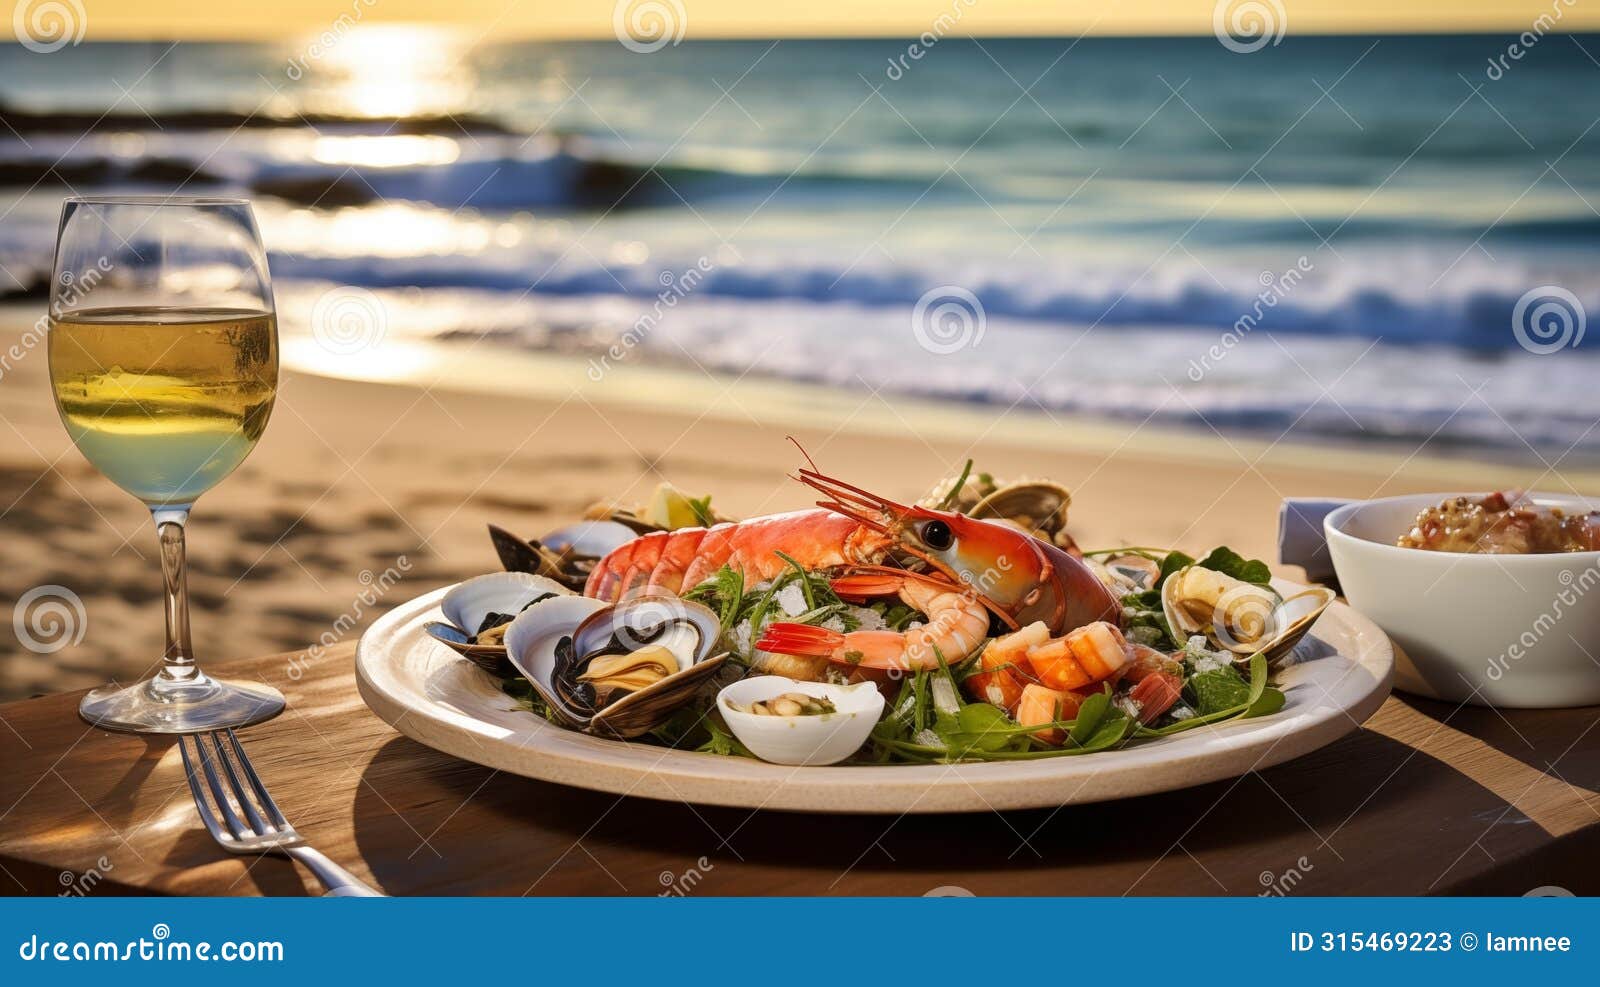 oceanfront dining fresh seafood served with seaside ambiance.ai generated